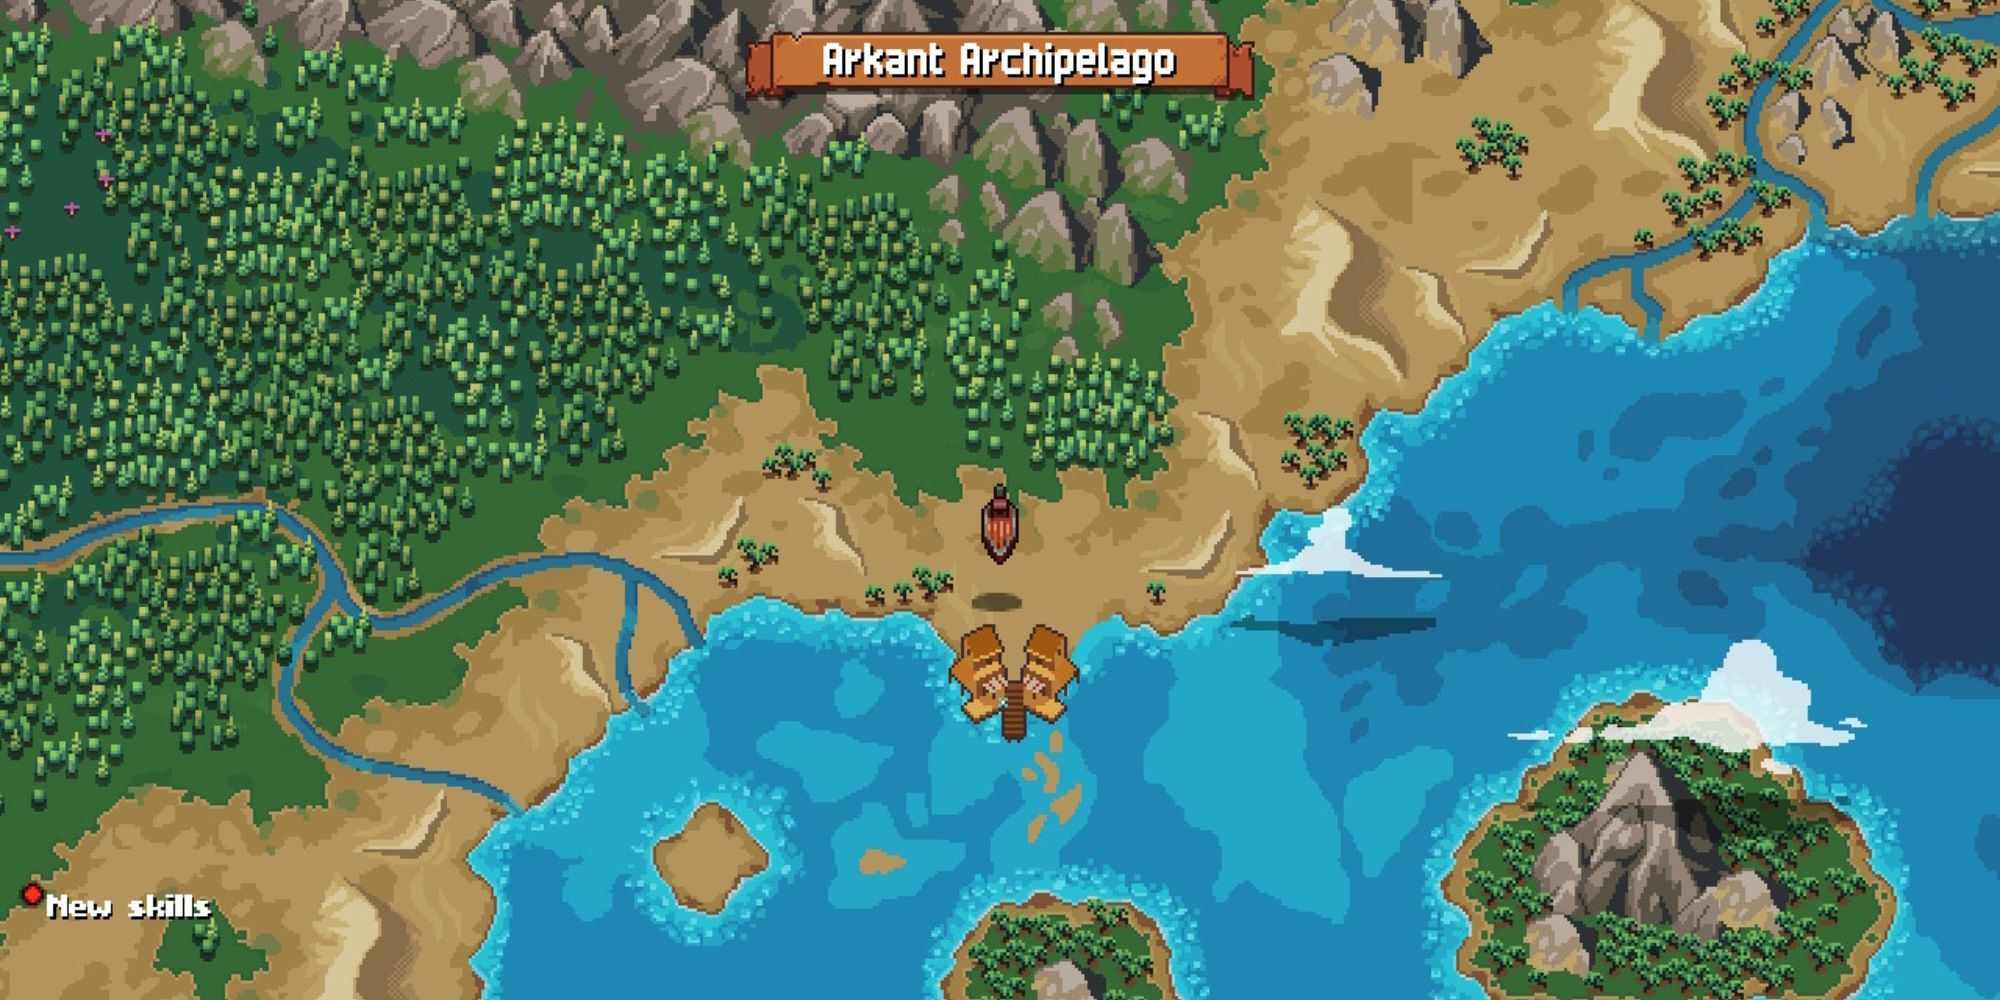 Arkant Archipelago as seen on the Airship Map in Chained Echoes